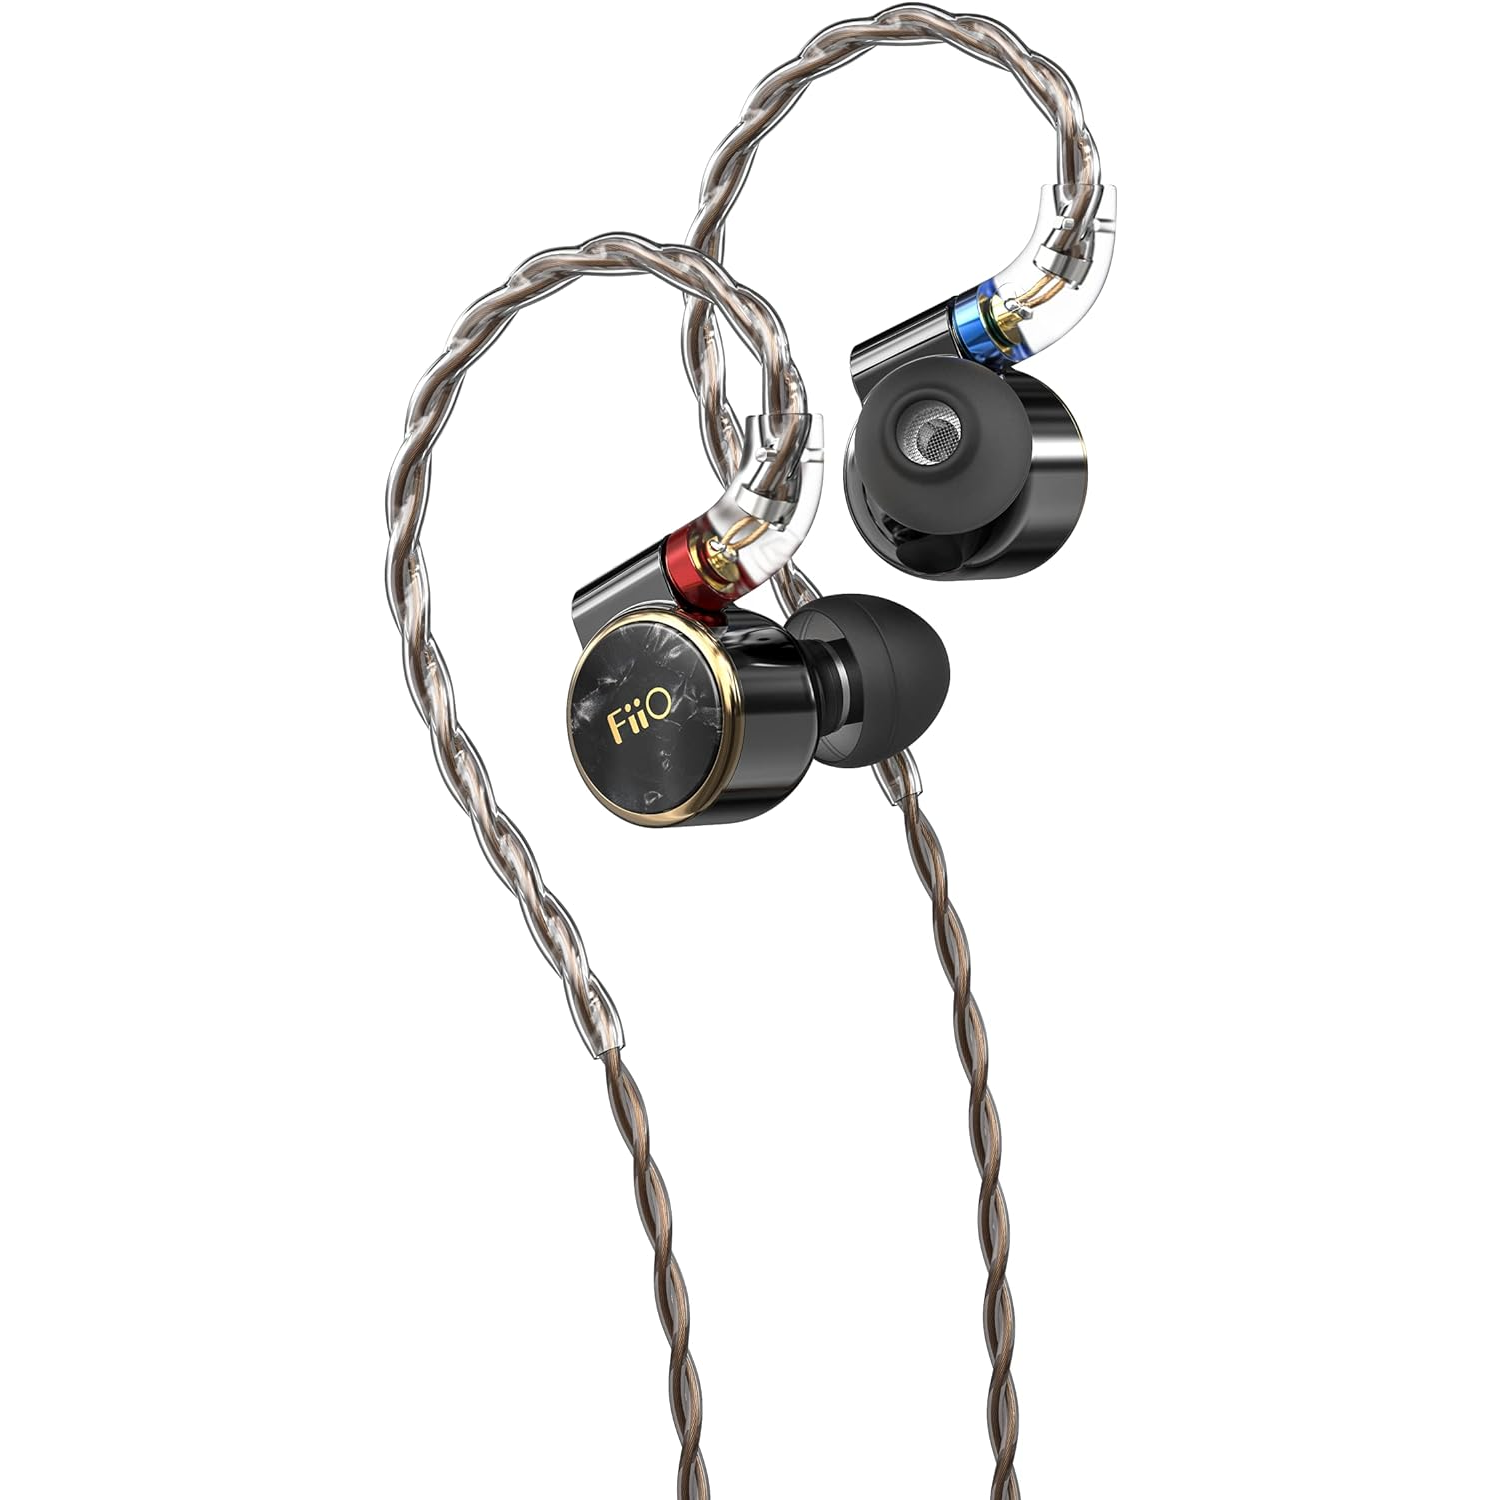 FiiO FD3 PRO earbuds shown on a transparent background.